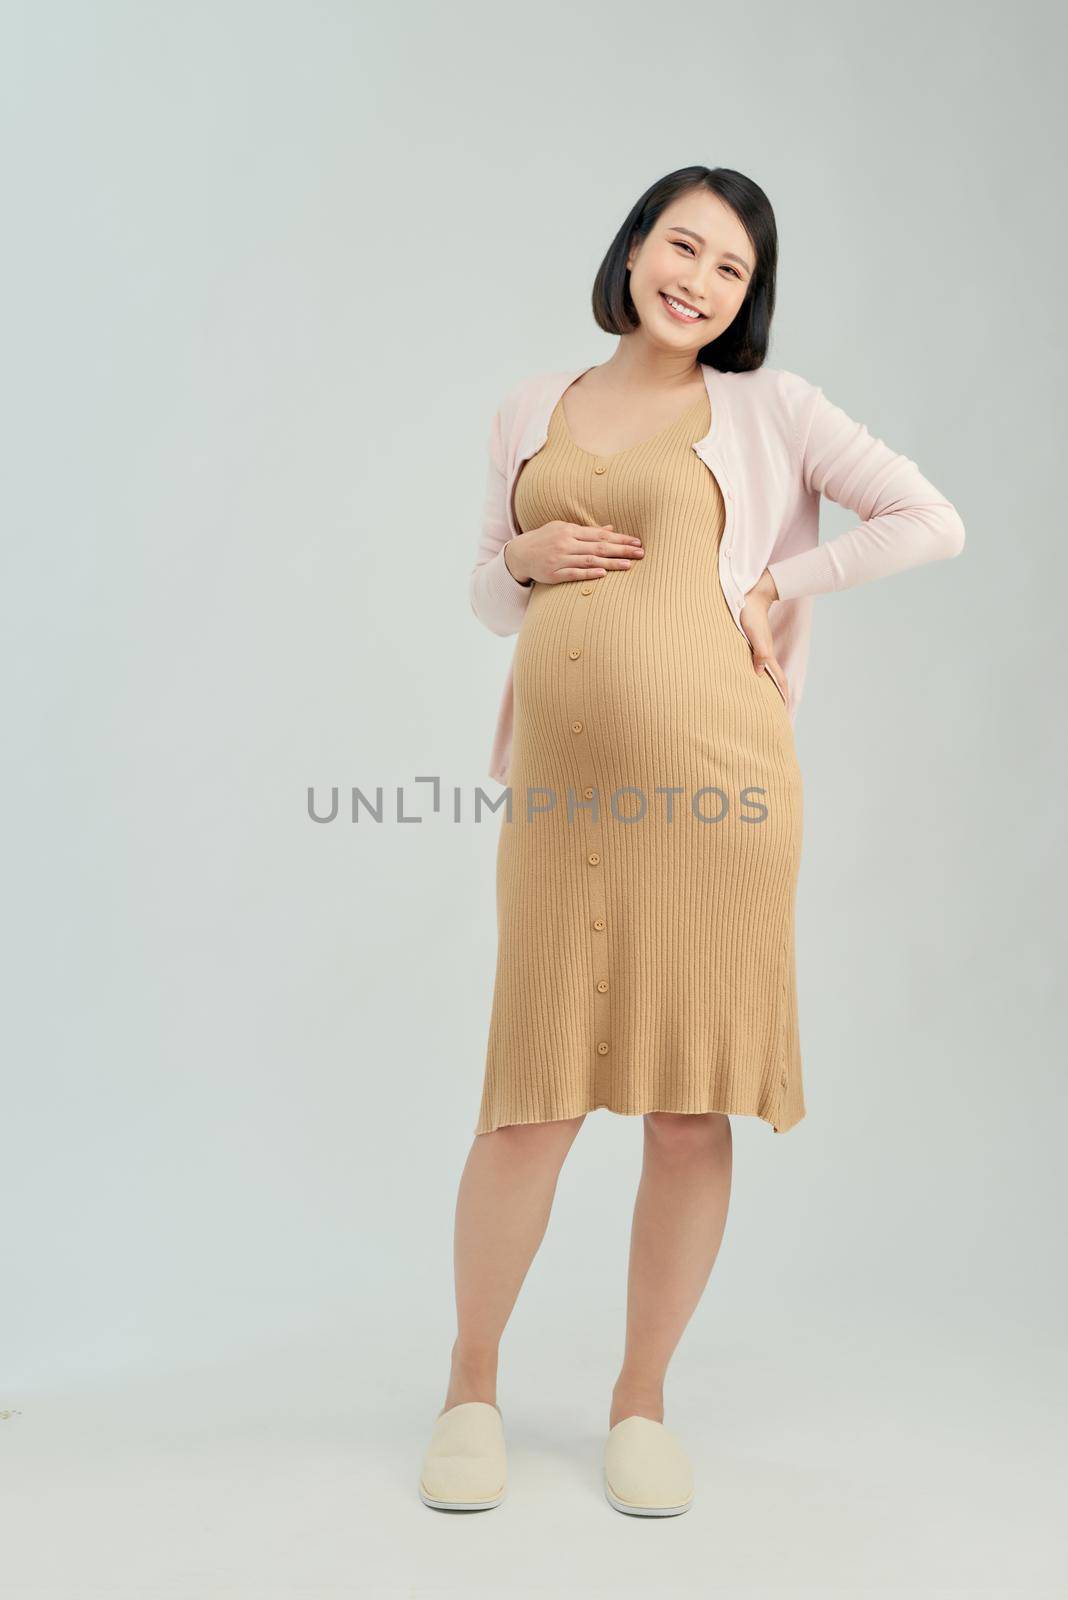 Pregnant woman on light background